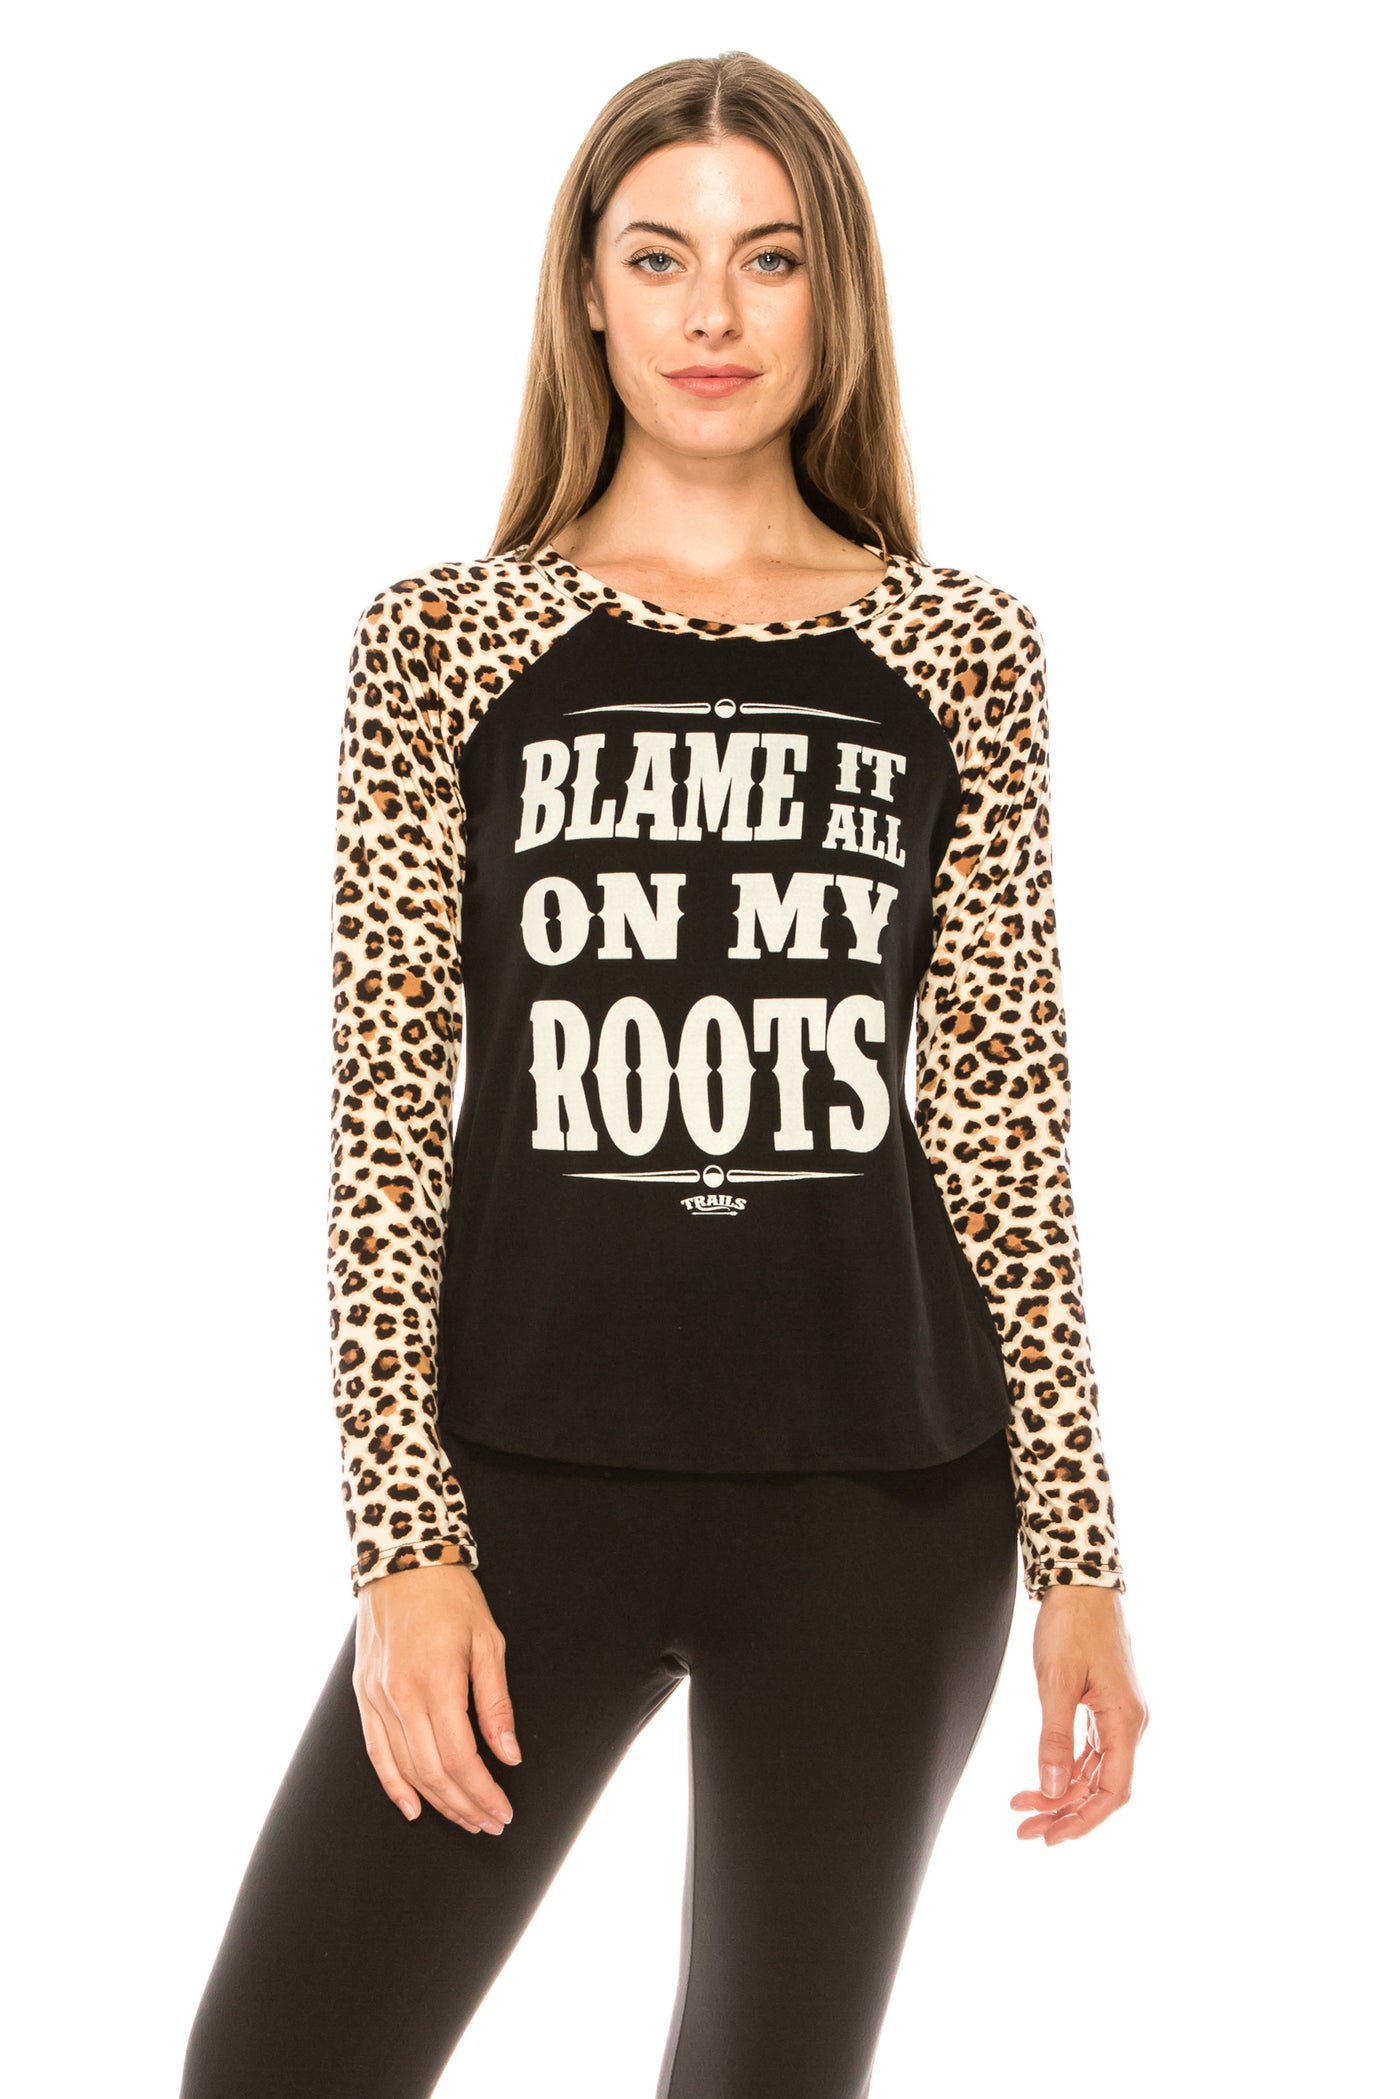 blame it on my roots long sleeve shirt - Trailsclothing.com